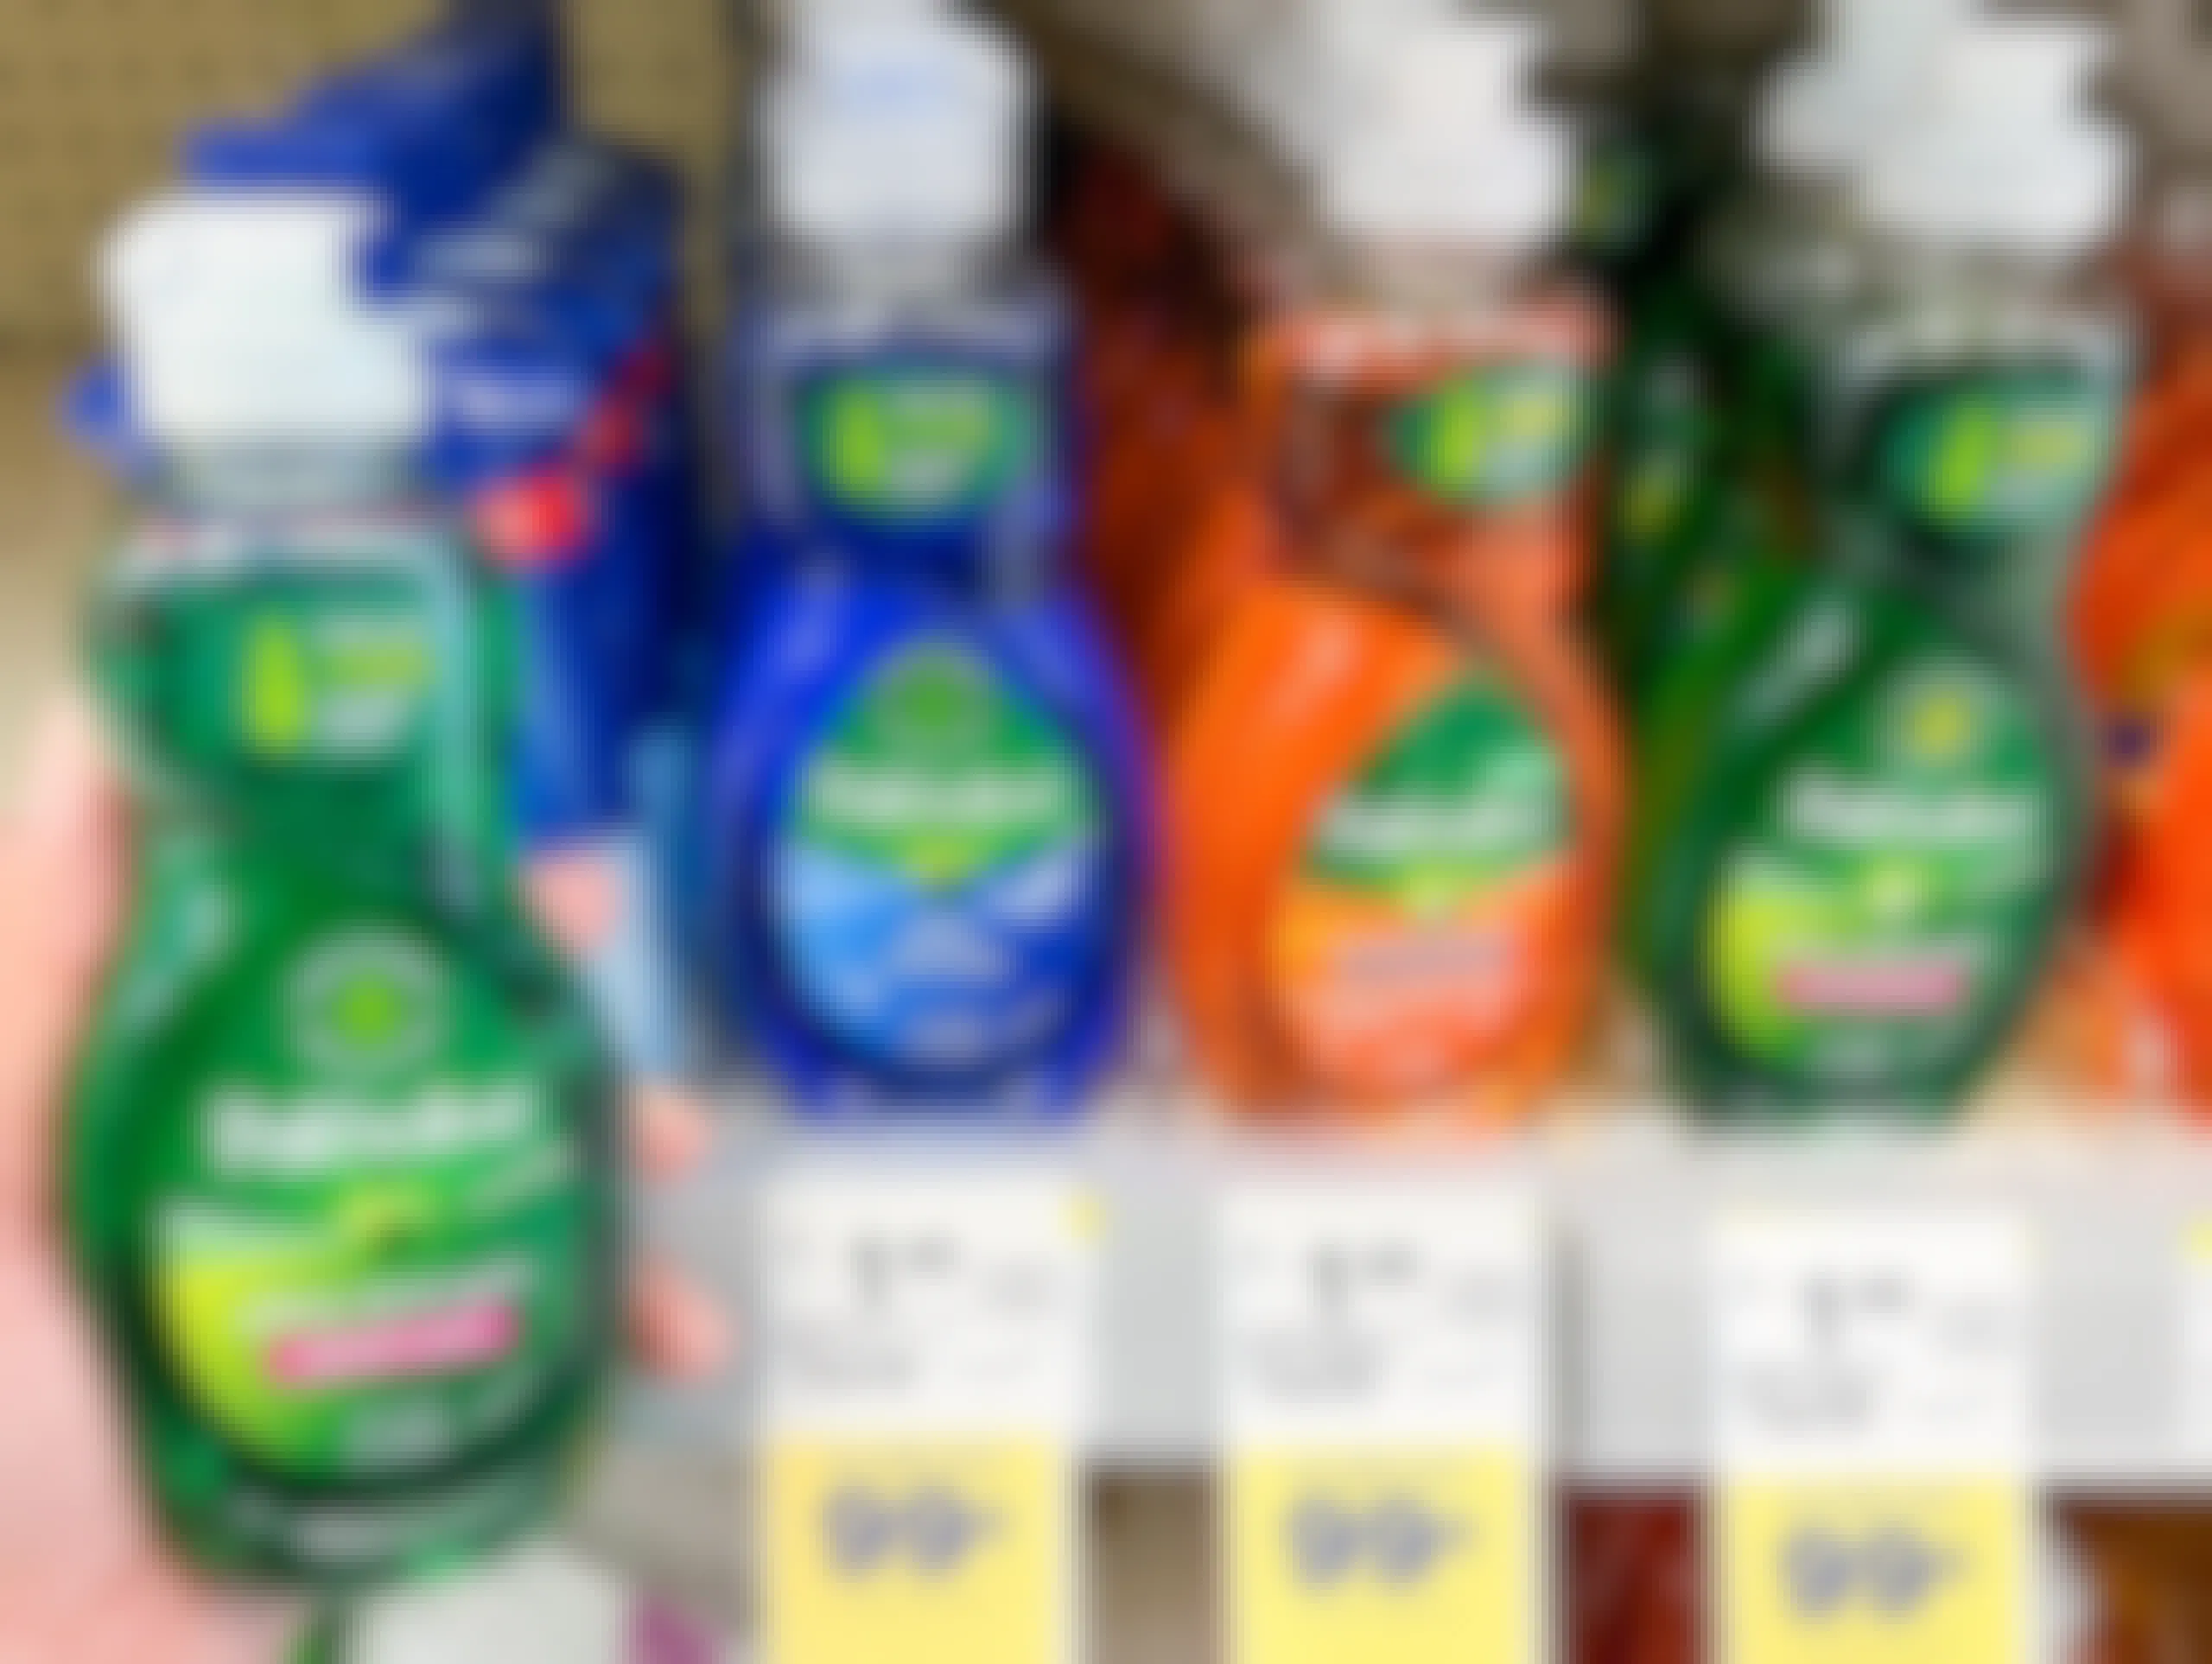 A person's hand holding a bottle of Palmolive Ultra Strength liquid dish soap next to a shelf of different variations of Palmolive liquid dish soap at Walgreens.